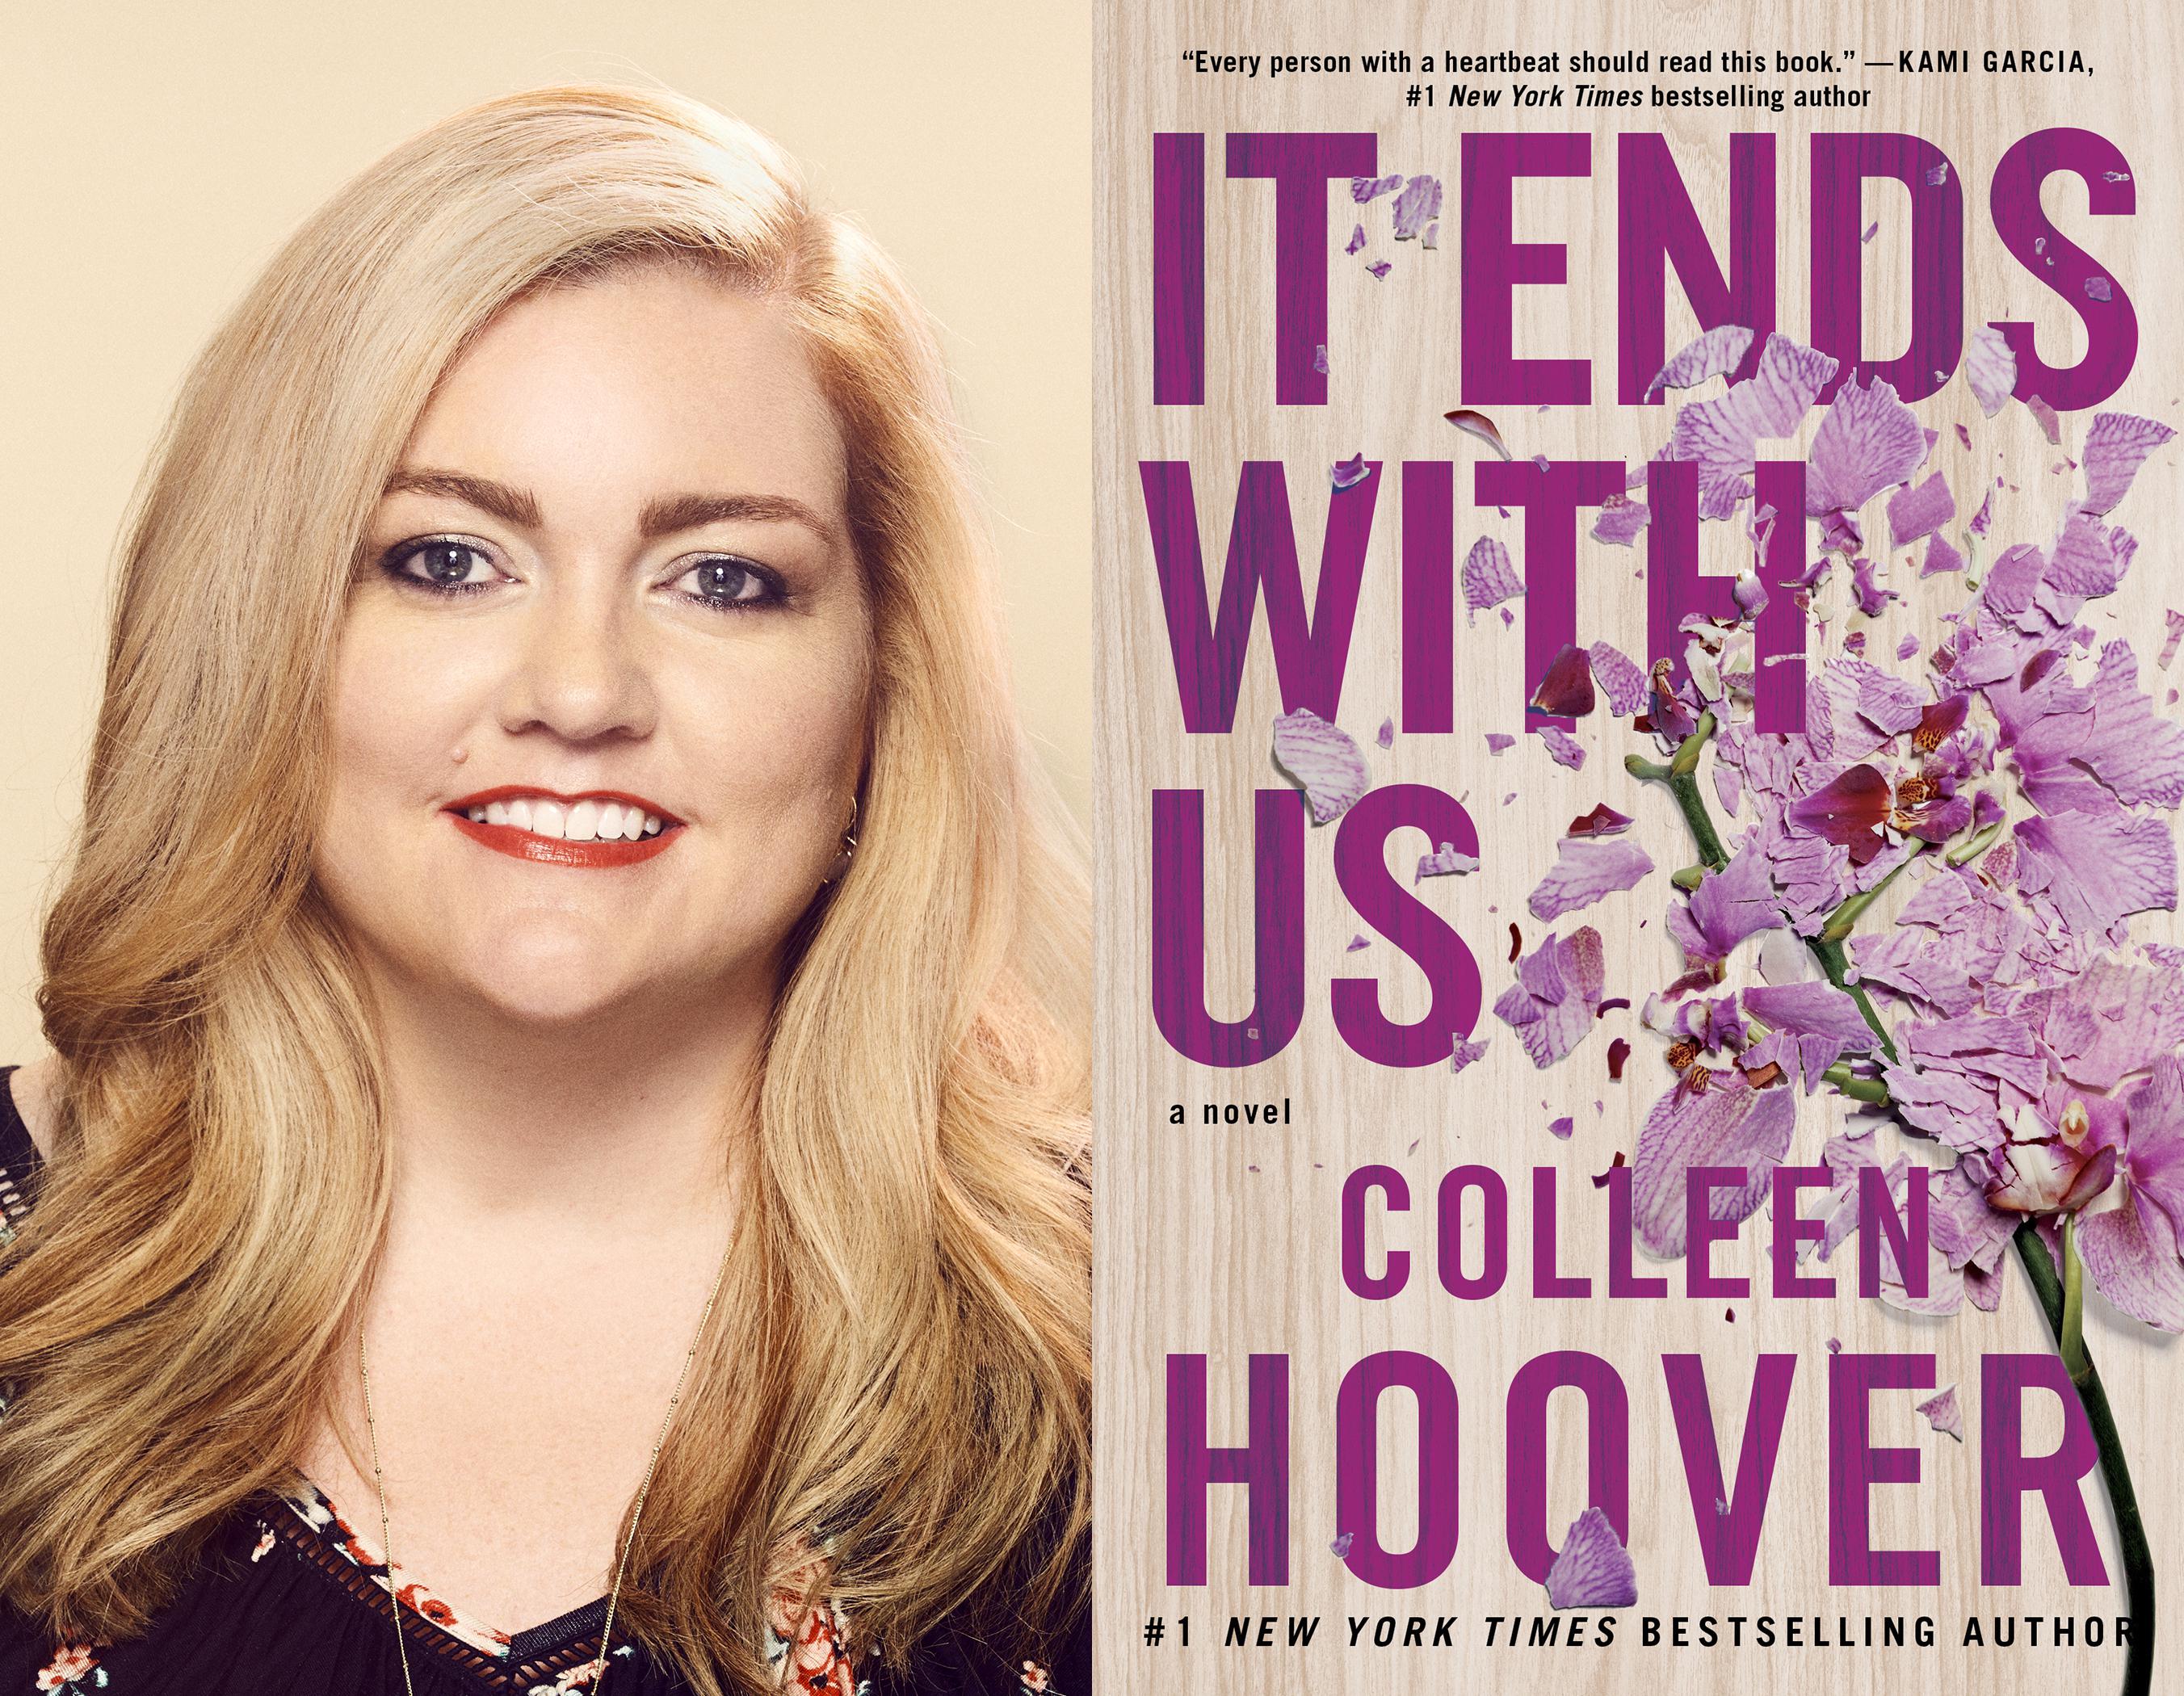 Colleen Hoover - Frequently Asked Questions (FAQs)